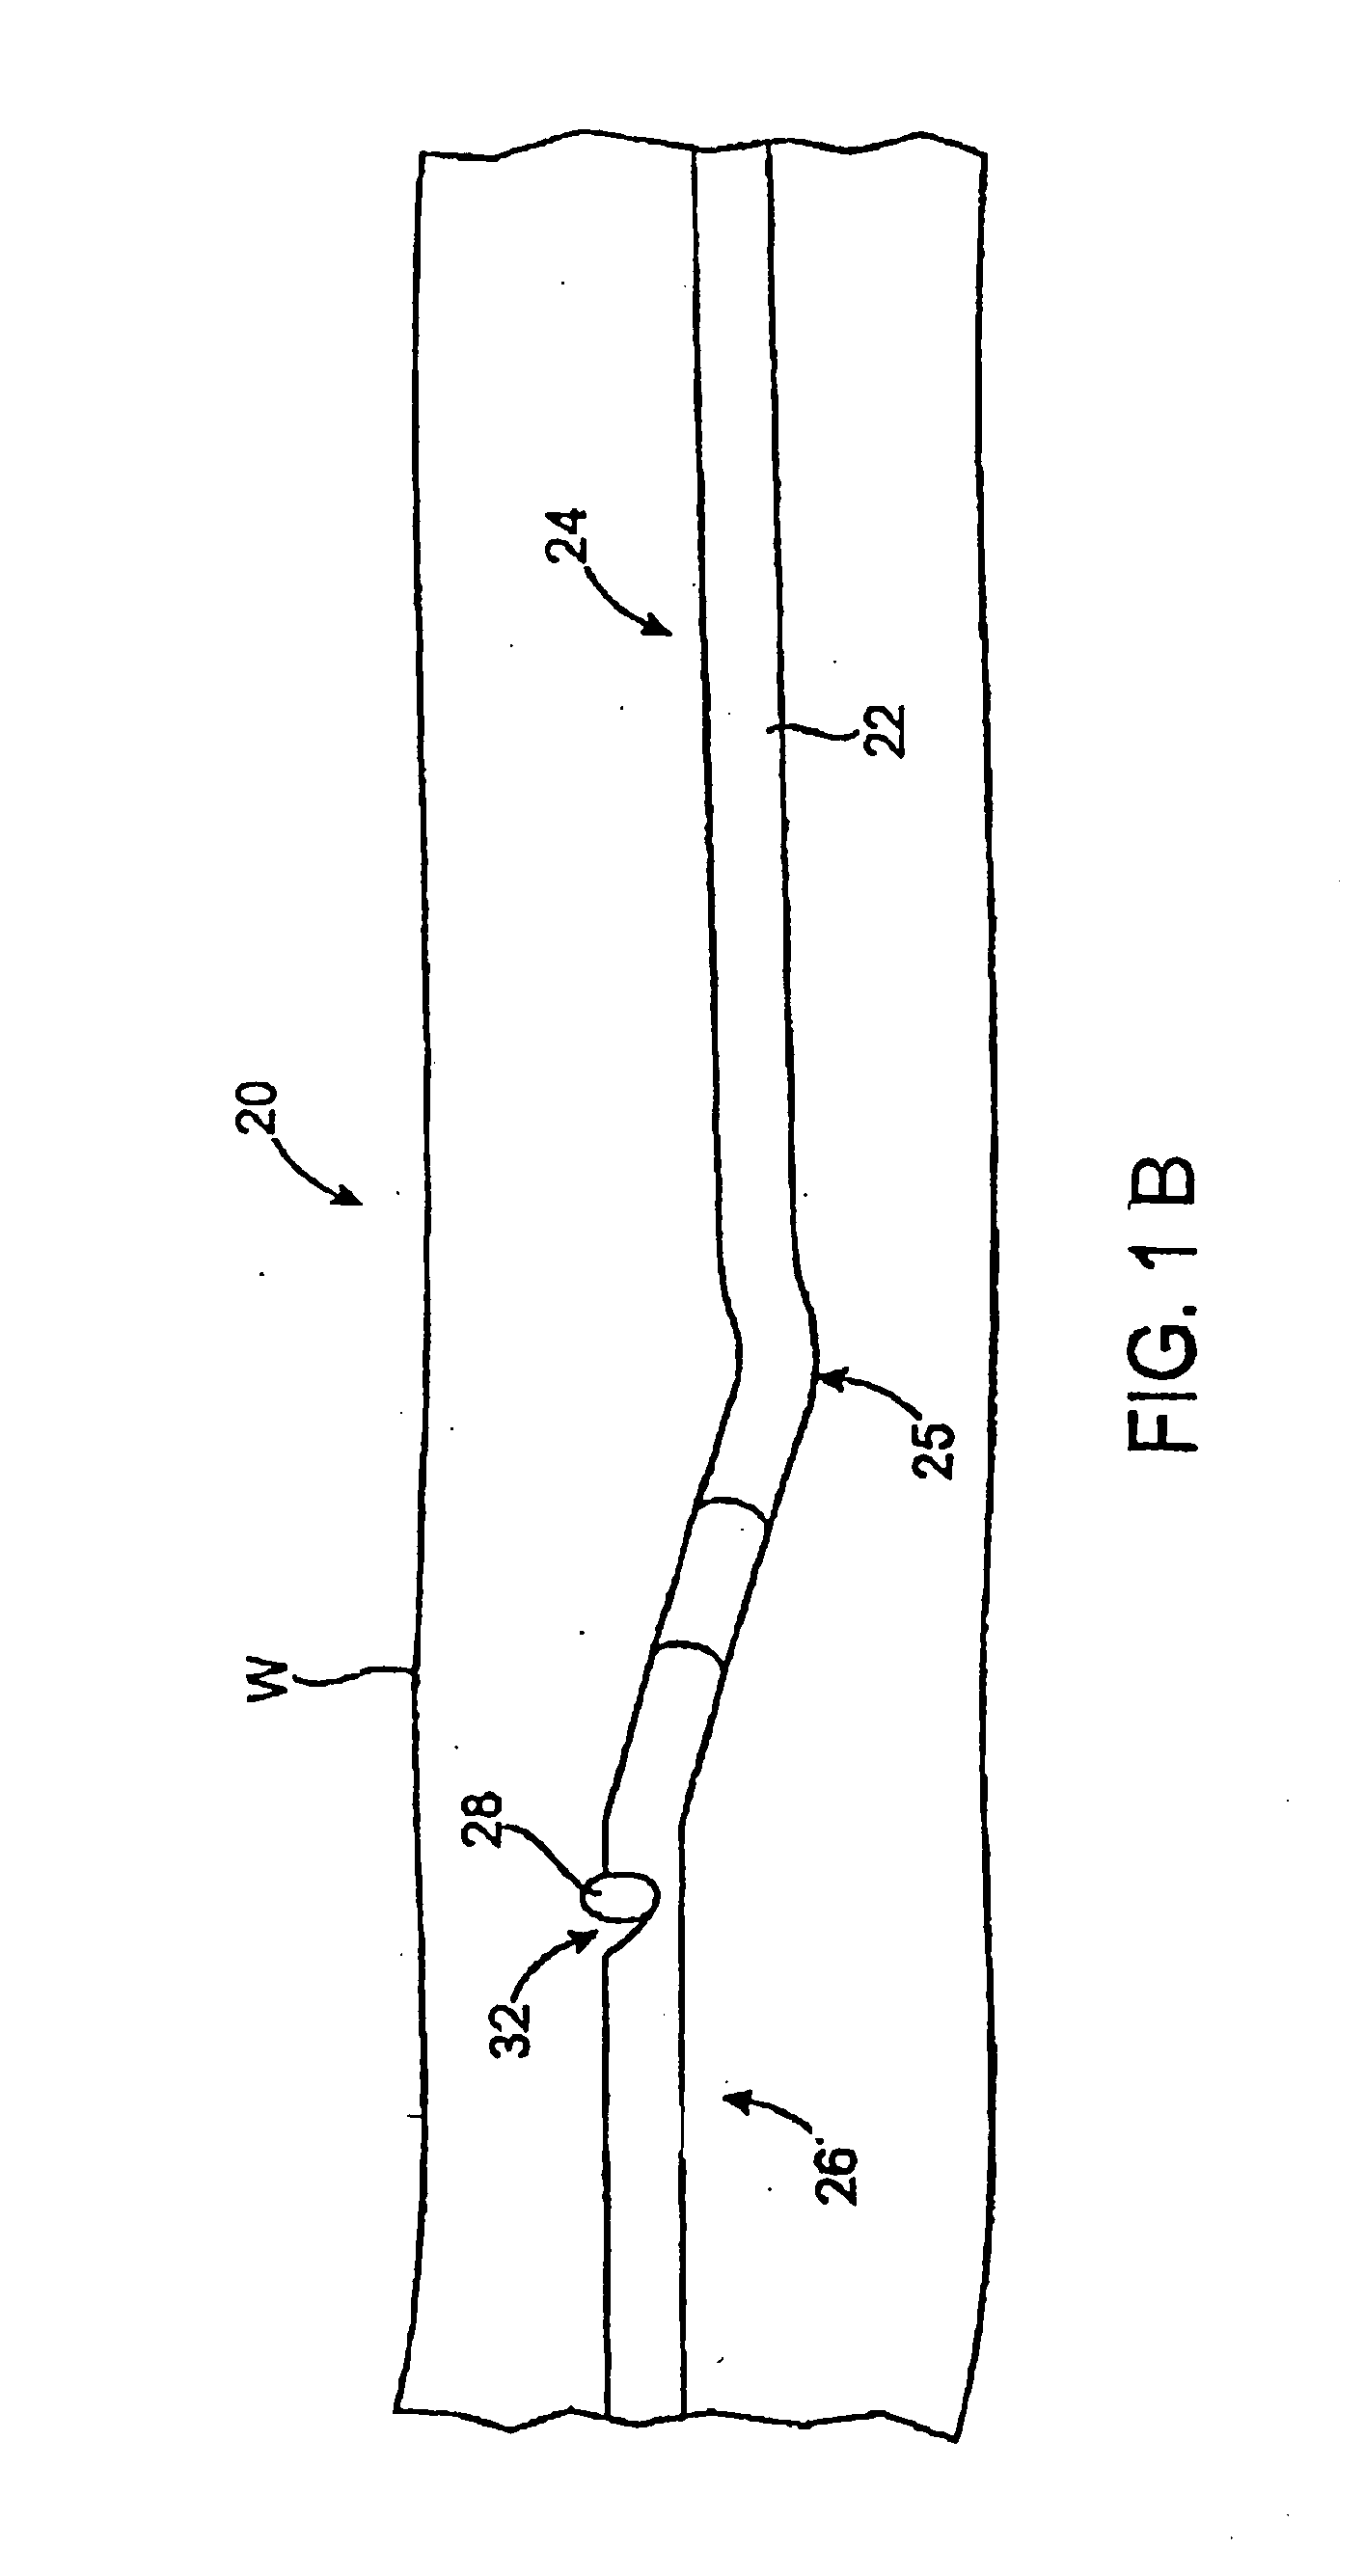 Method of evaluating a treatment for vascular disease